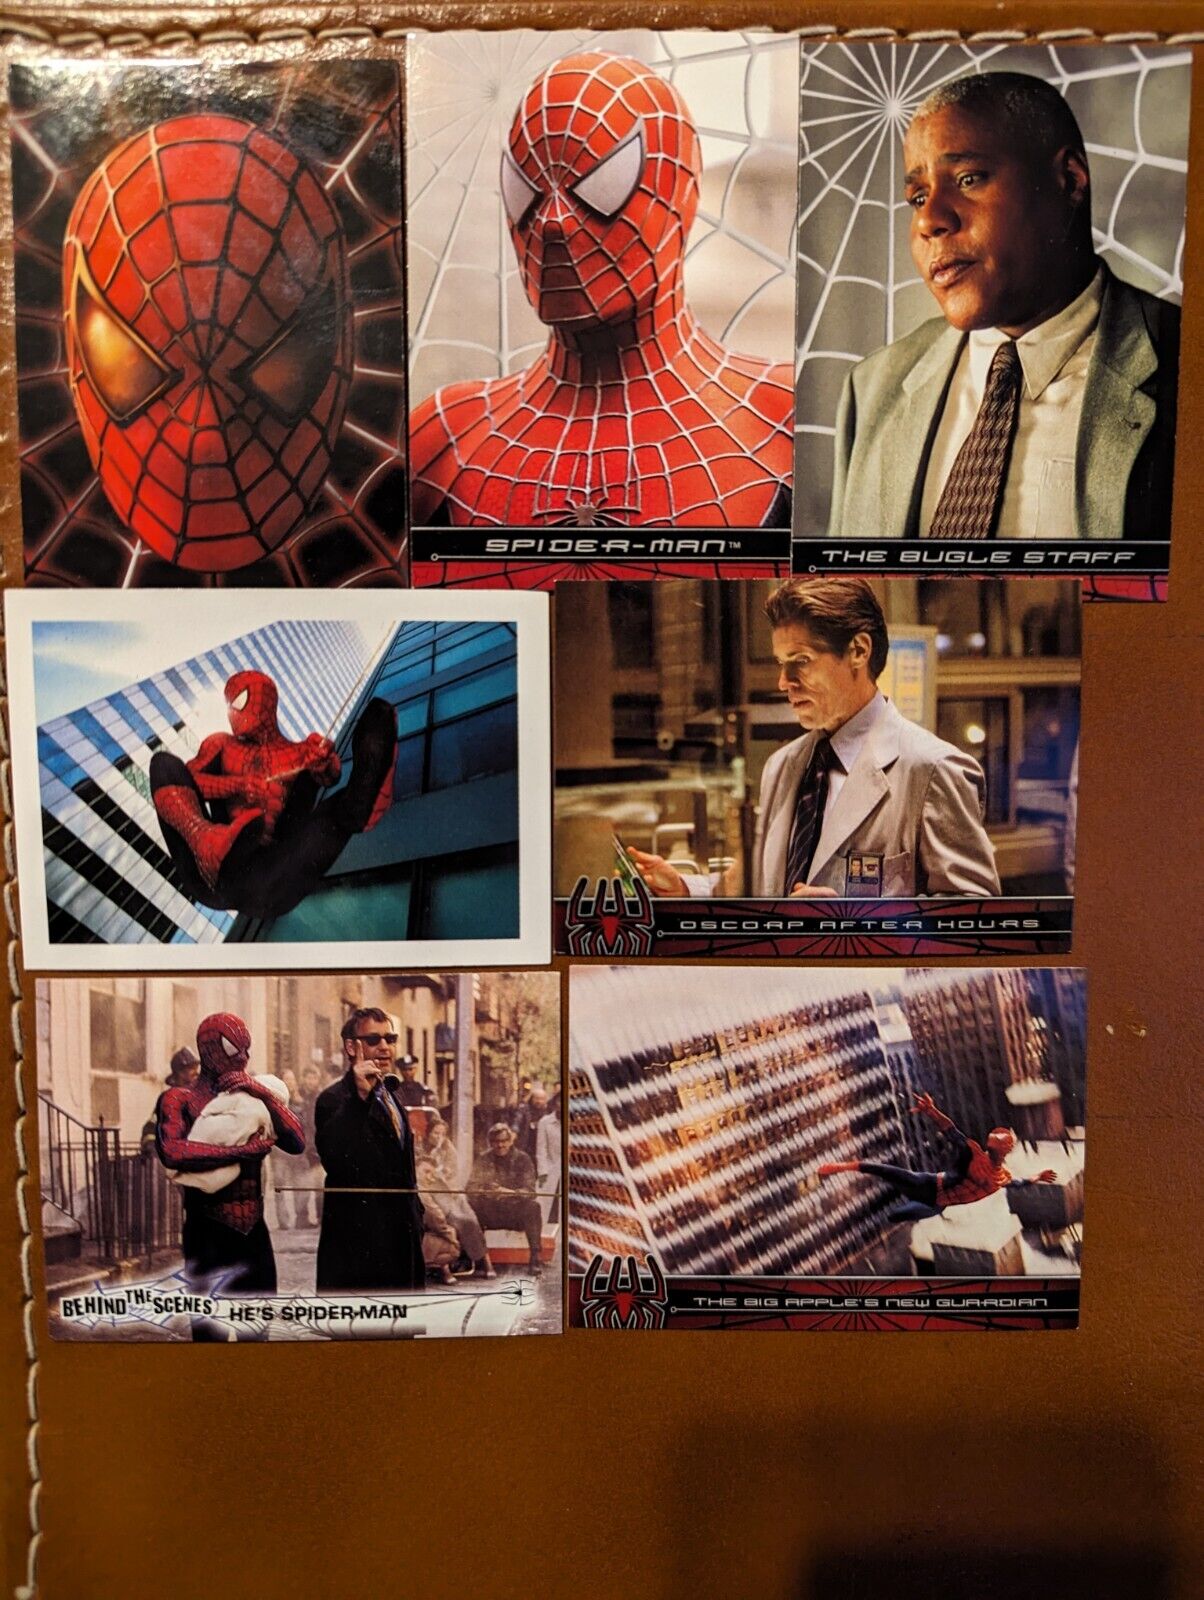 SPIDER-MAN THE MOVIE 2002 TOPPS TRADING CARDS - Lot of 7 Cards